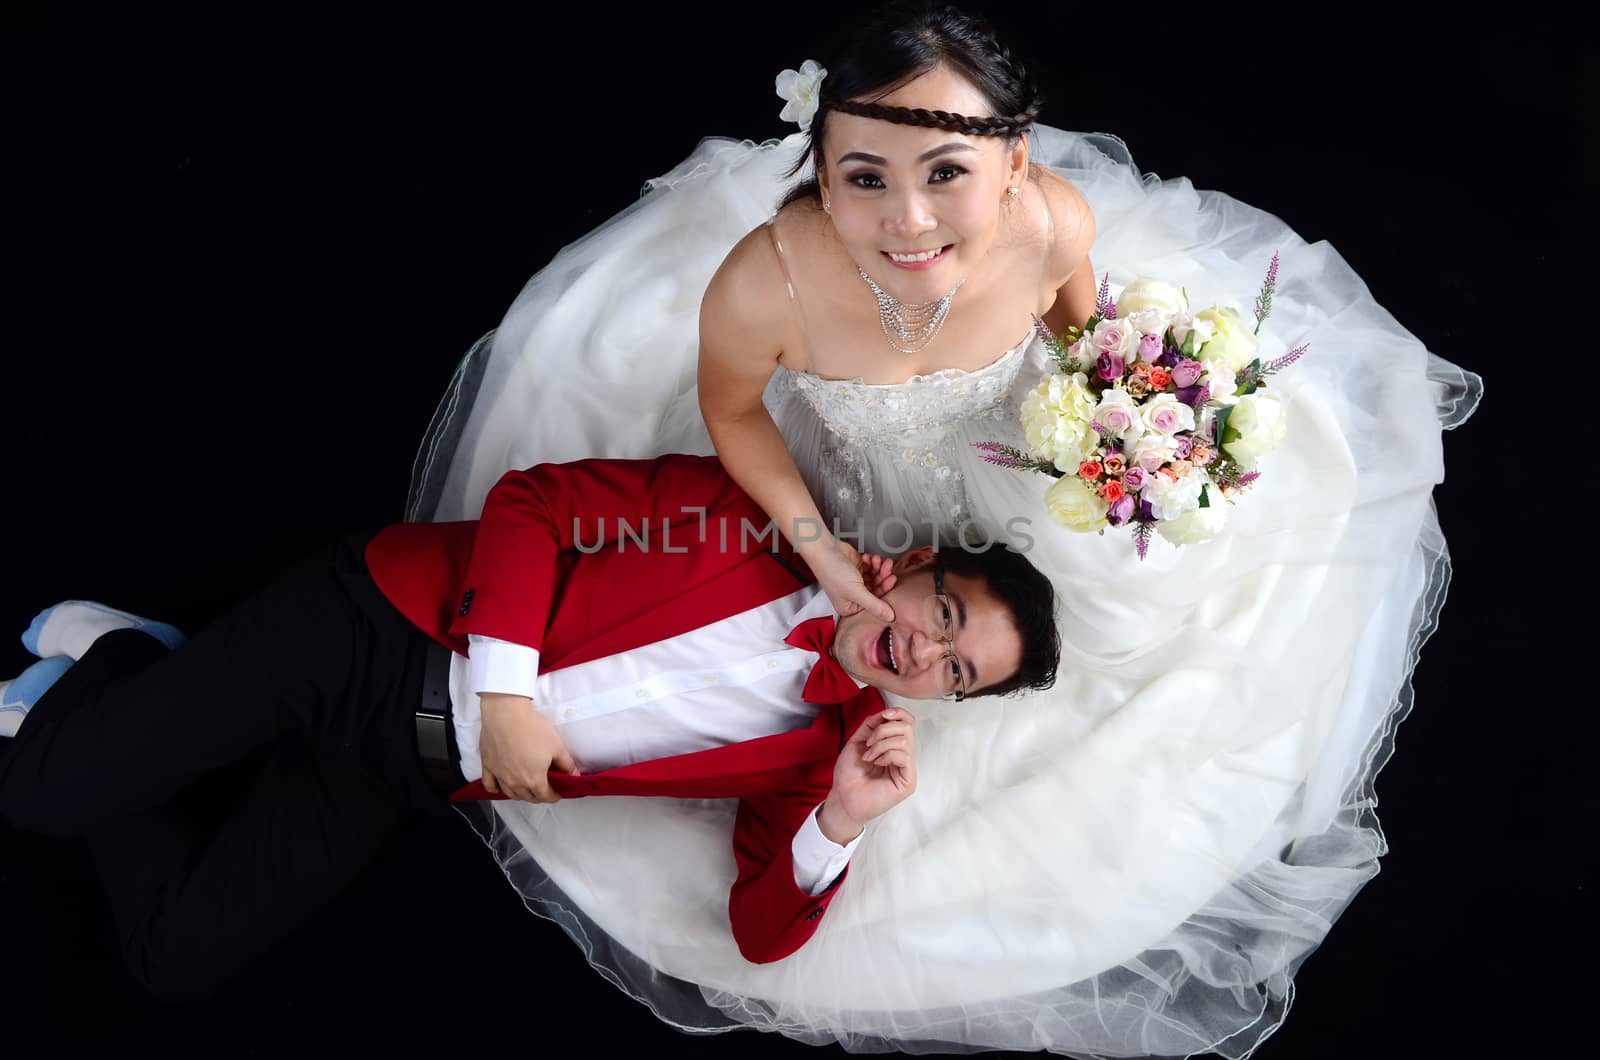 Portrait of young elegant enamoured just married groom and bride embracing at Wedding on black background